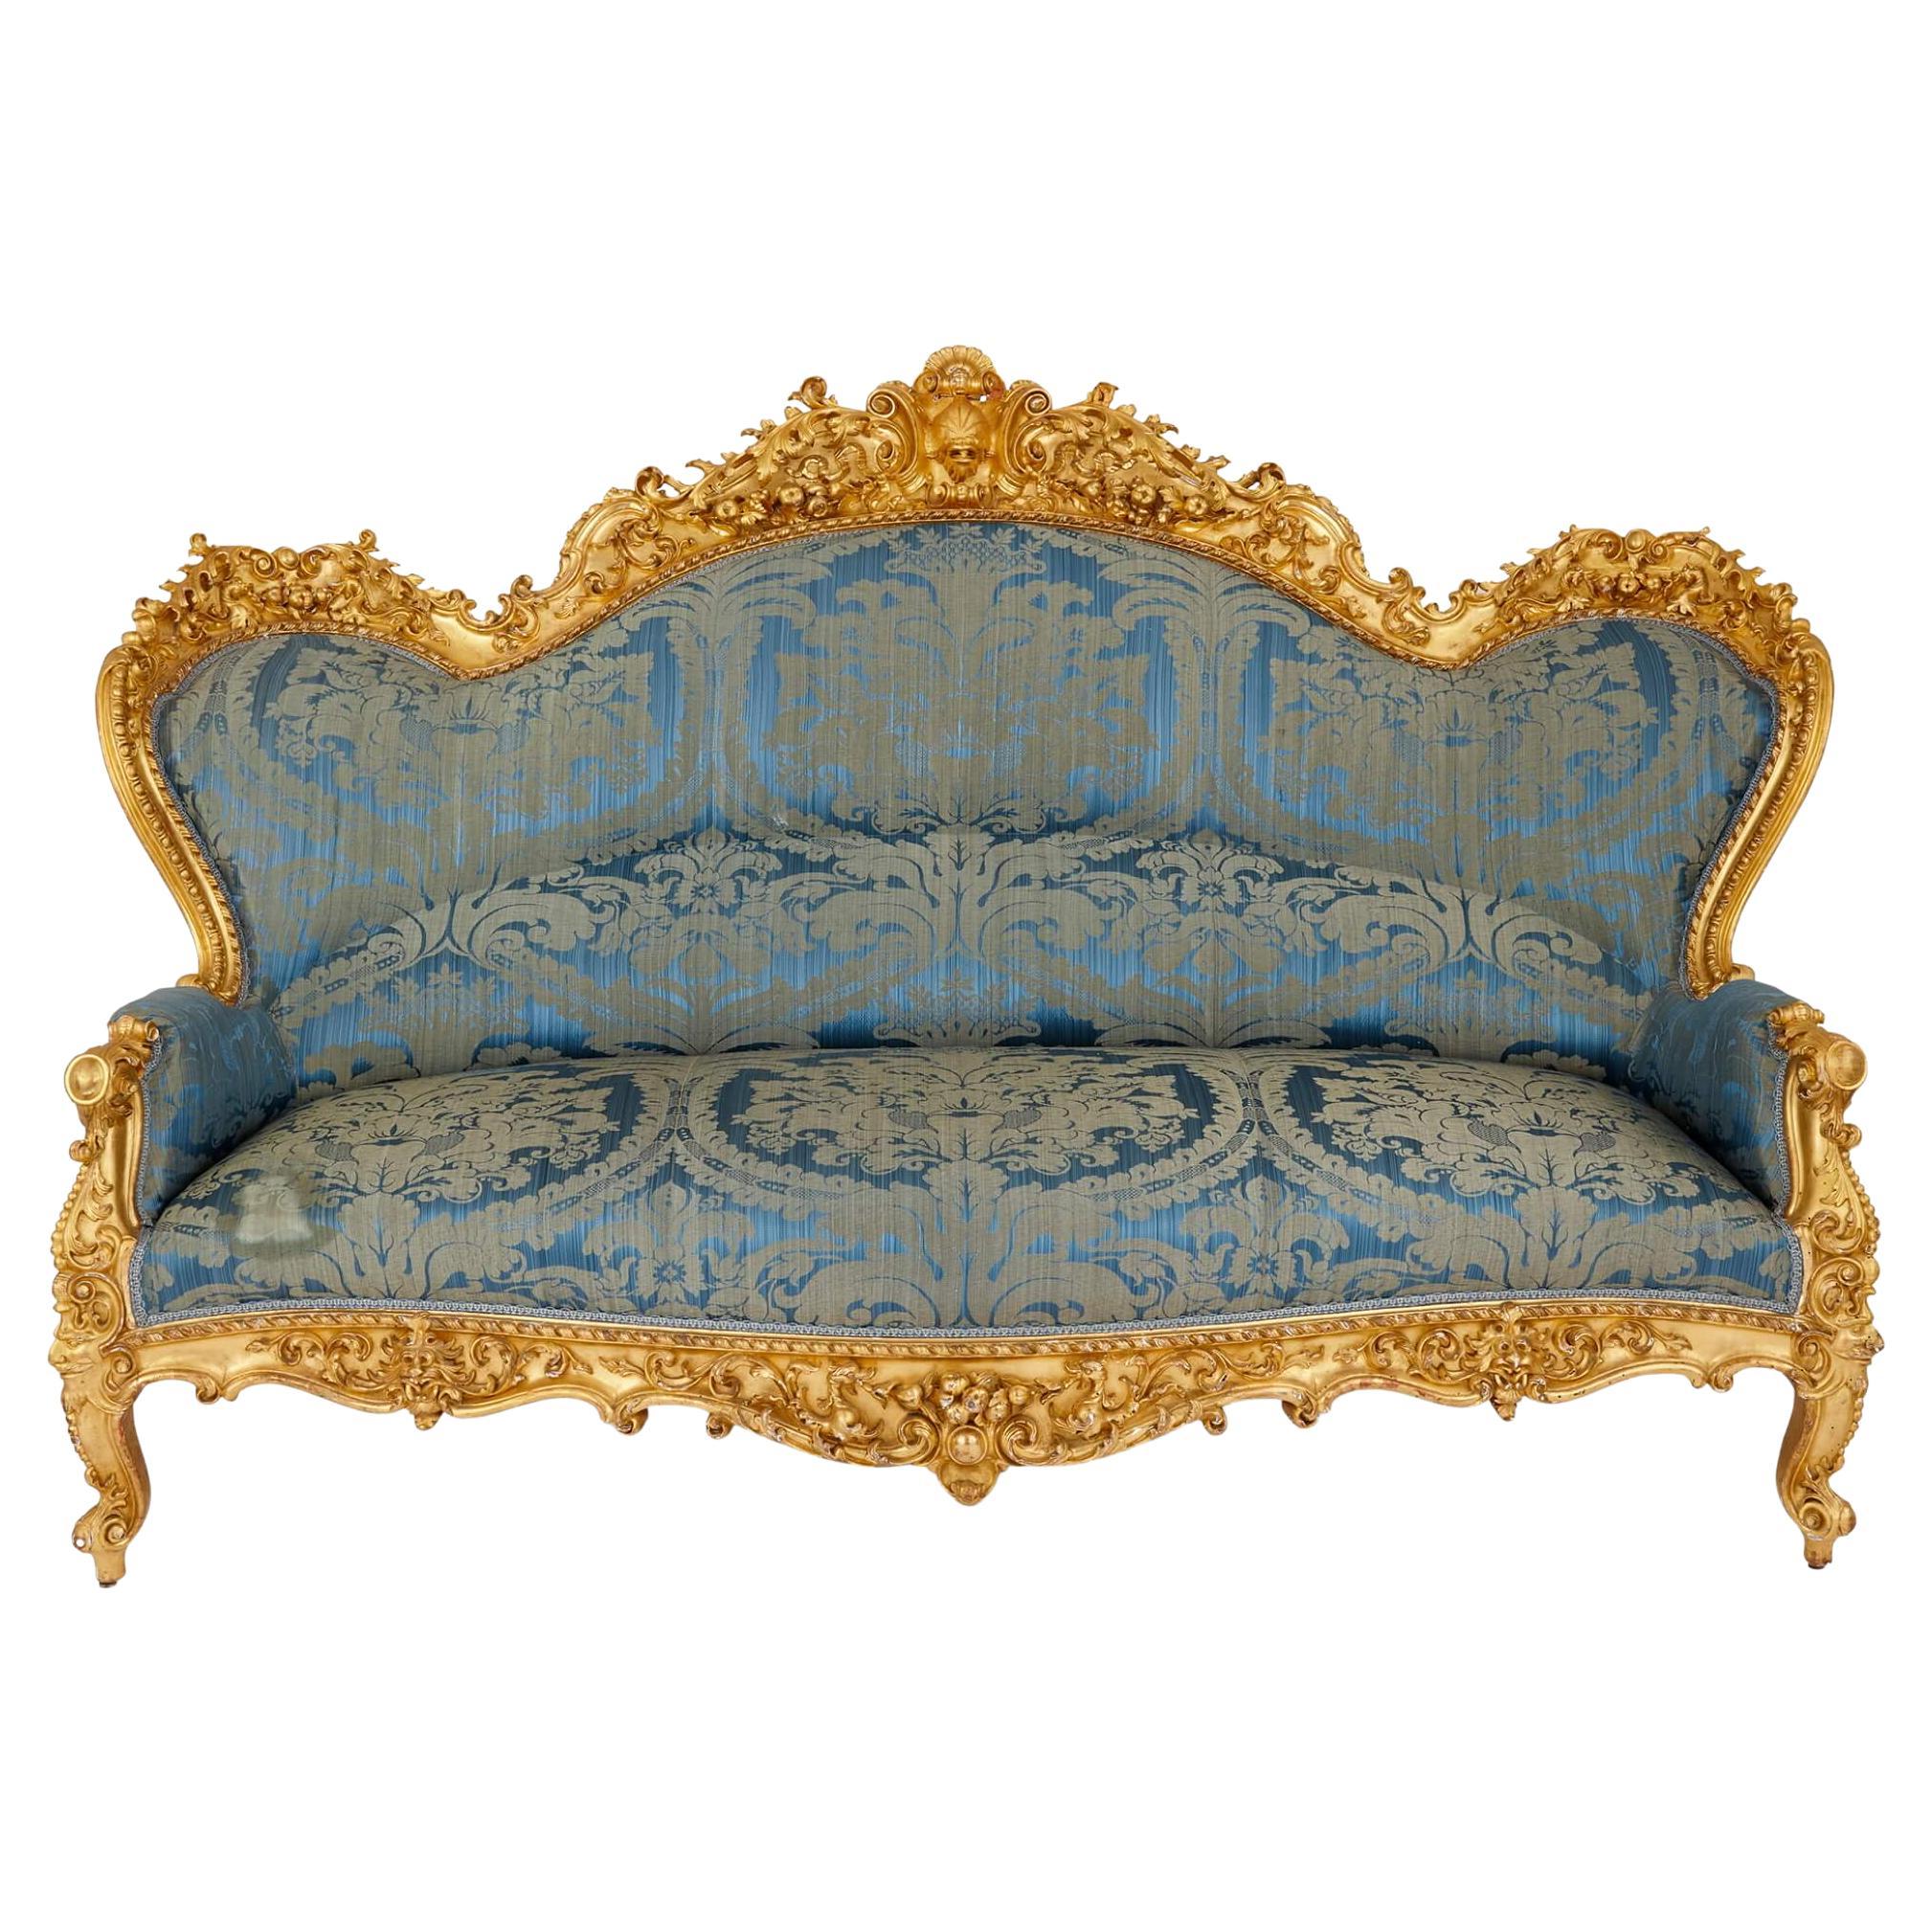 Large Rococo Revival Carved Giltwood Sofa For Sale